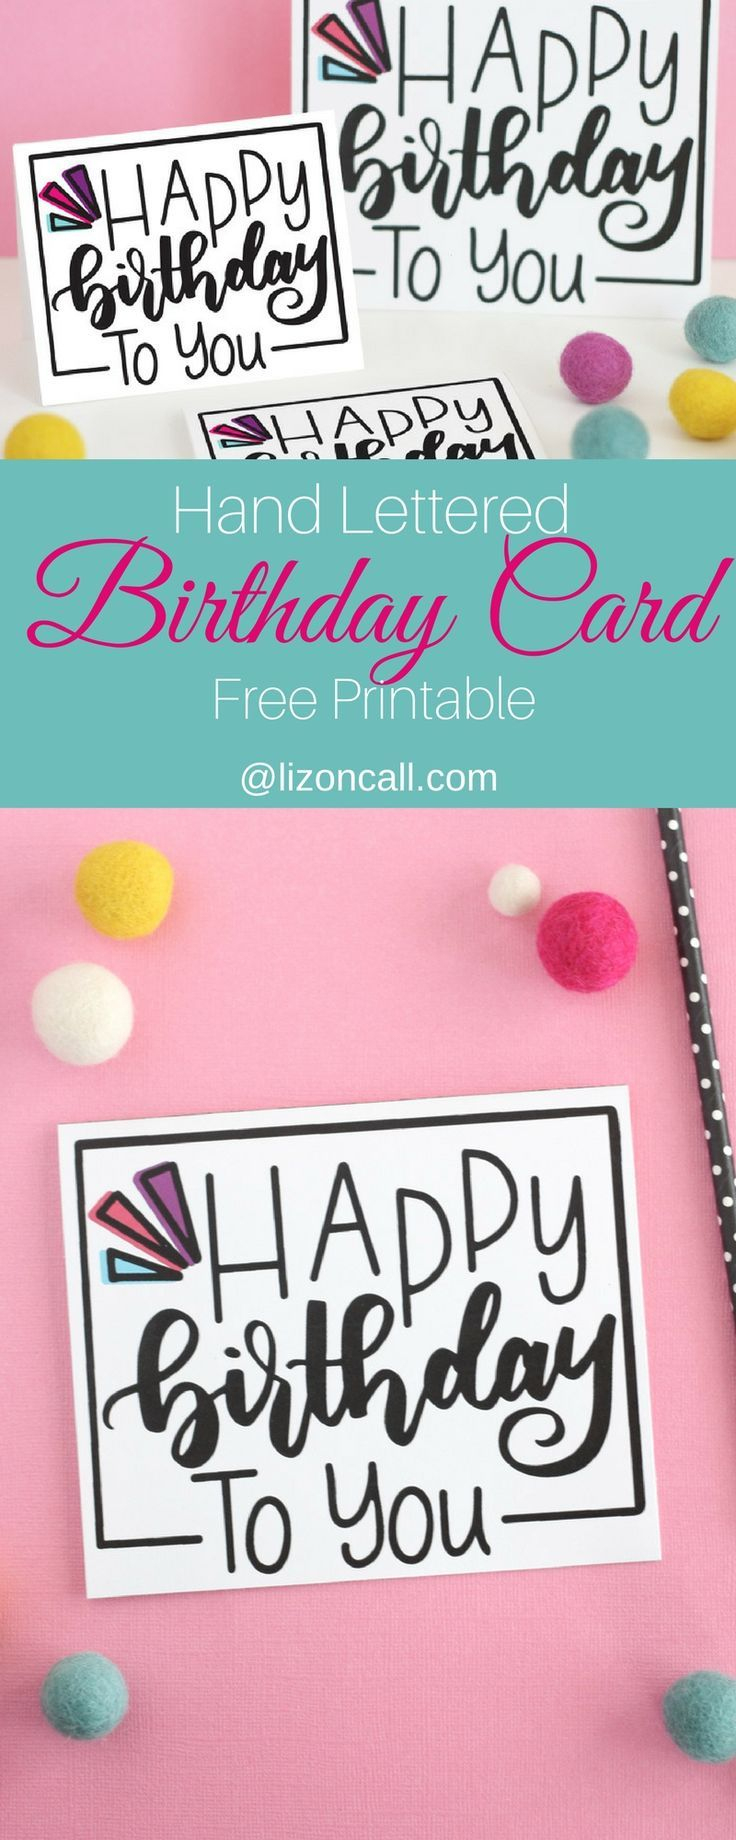 Hand Lettered Free Printable Birthday Card | Celebrating Birthdays - Free Printable Birthday Cards For Your Best Friend